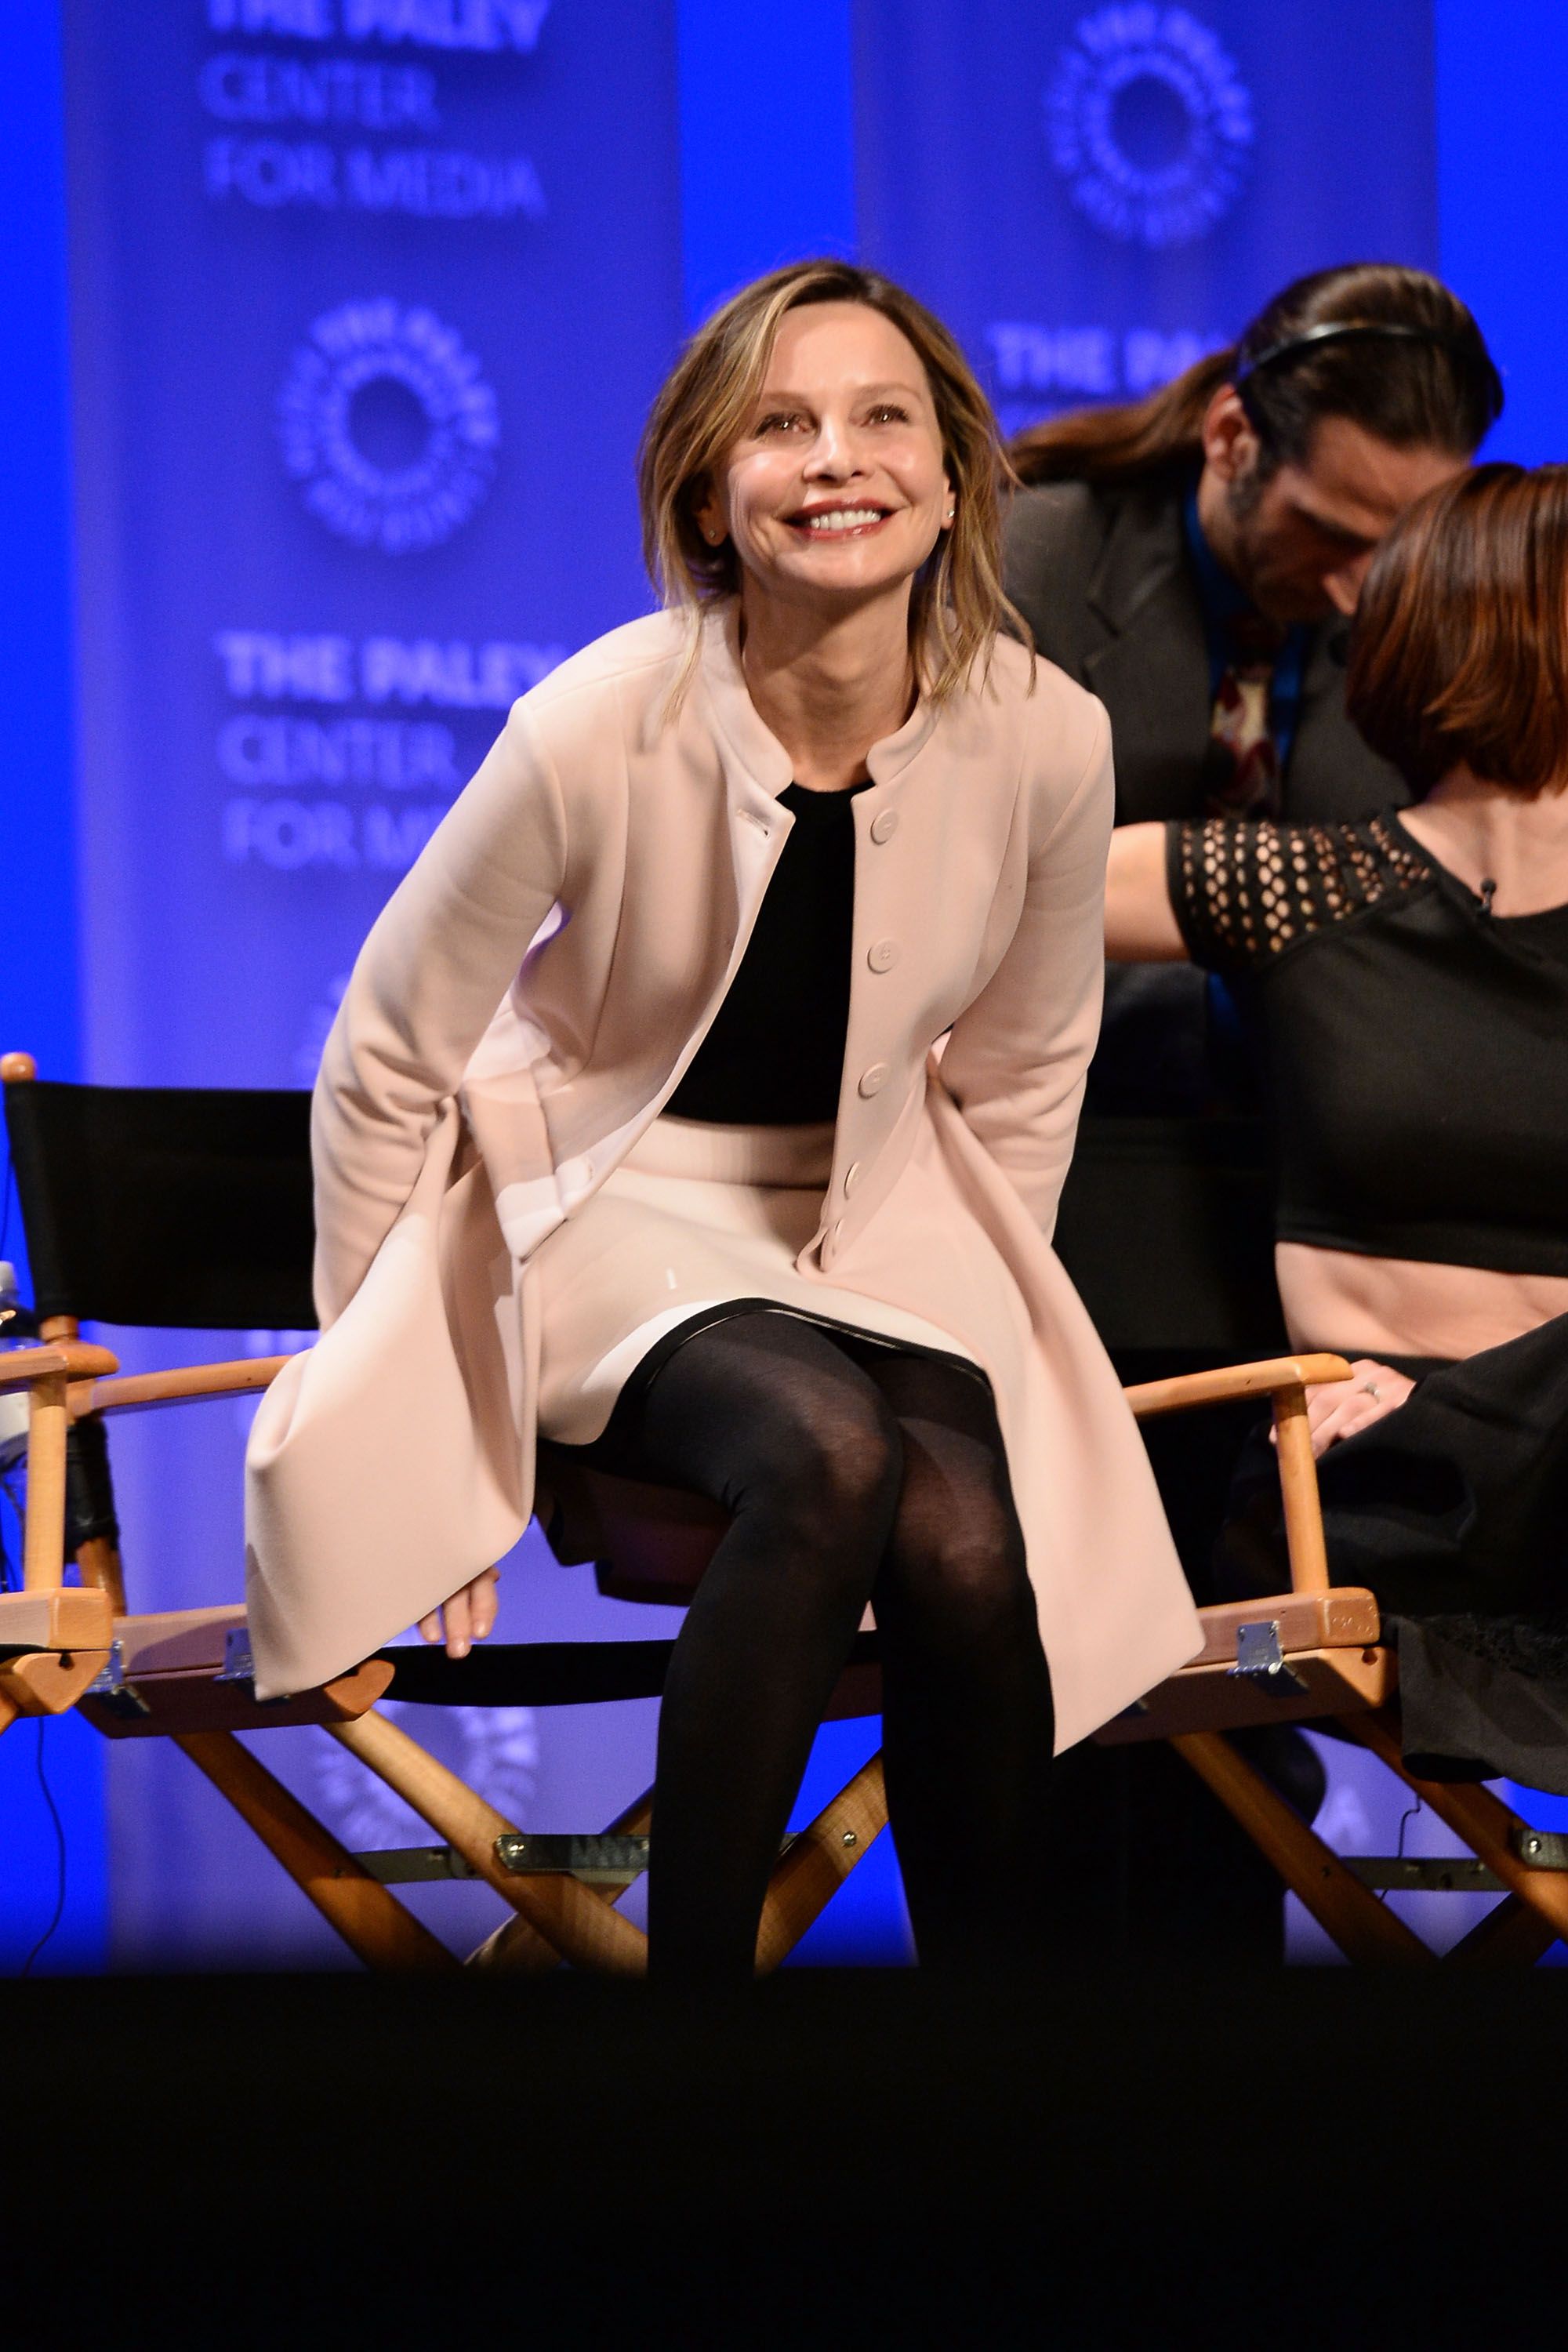  Calista Flockhart seated at an event